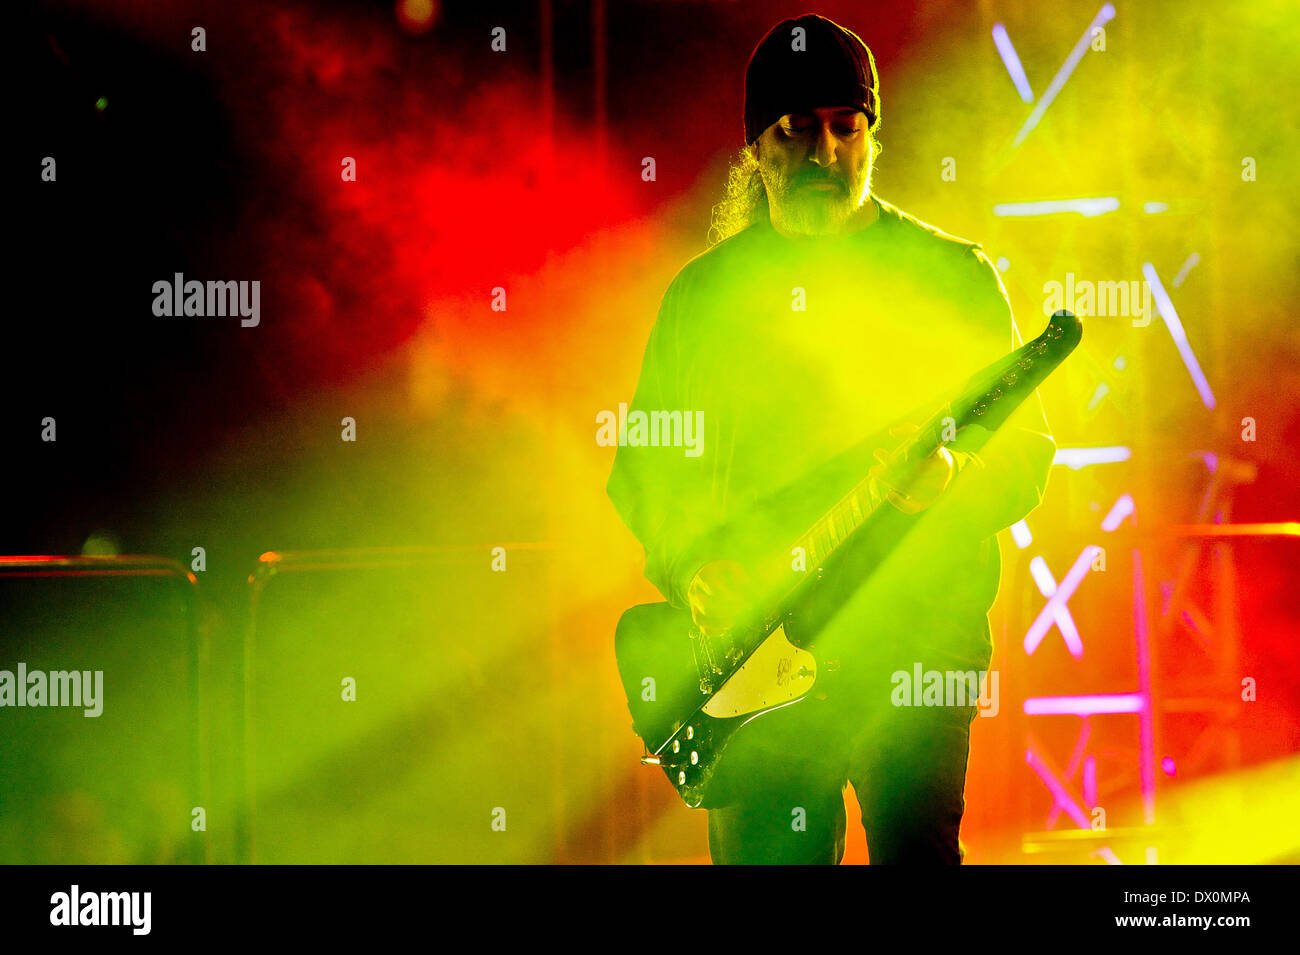 Austin, Texas, USA. 14th Mar, 2014. Kim Thayil of Soundgarden performs in concert at the Guitar Center Direct TV live stream show from a roof top party during South By Southwest (SXSW) on March 14, 2014 in Austin, Texas - USA (Photo by Manuel Nauta/NurPhoto) Credit:  Manuel Nauta/NurPhoto/ZUMAPRESS.com/Alamy Live News Stock Photo